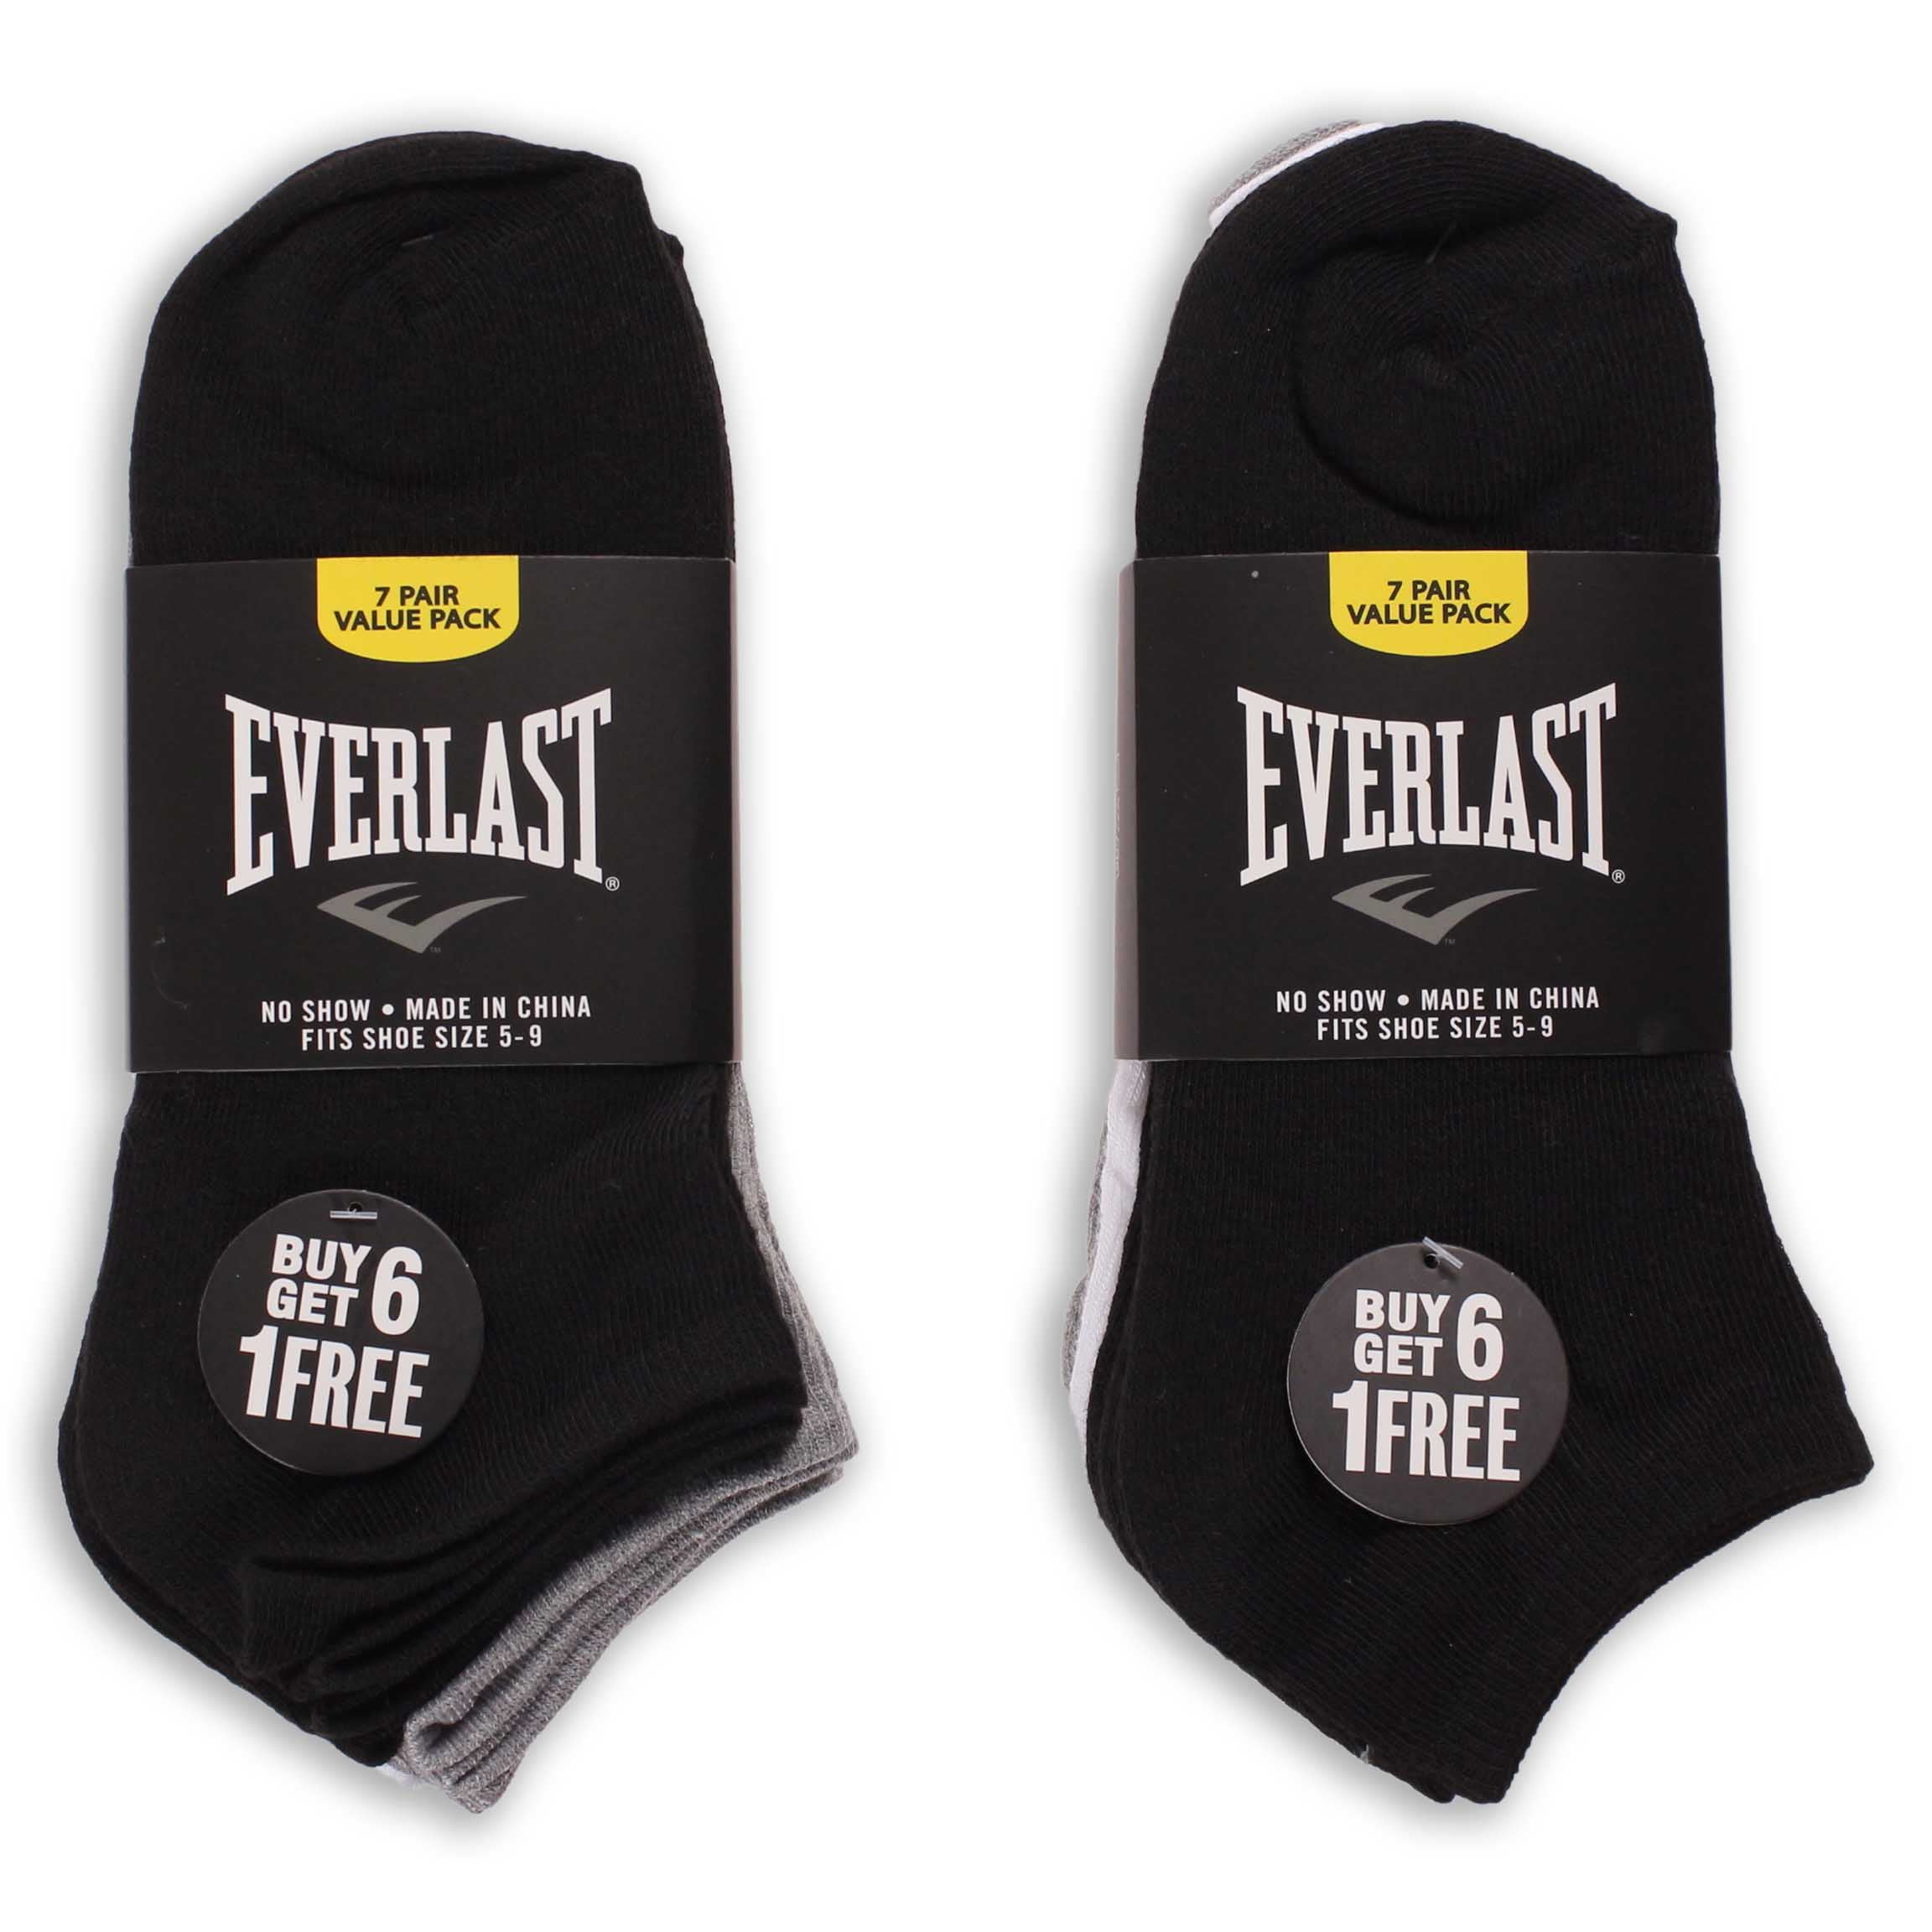 EVERLAST SPORT Men's Socks Size 10-13 Shoe Size 6-12 Pack Of 3 OR 6>YOU PICK NWT 